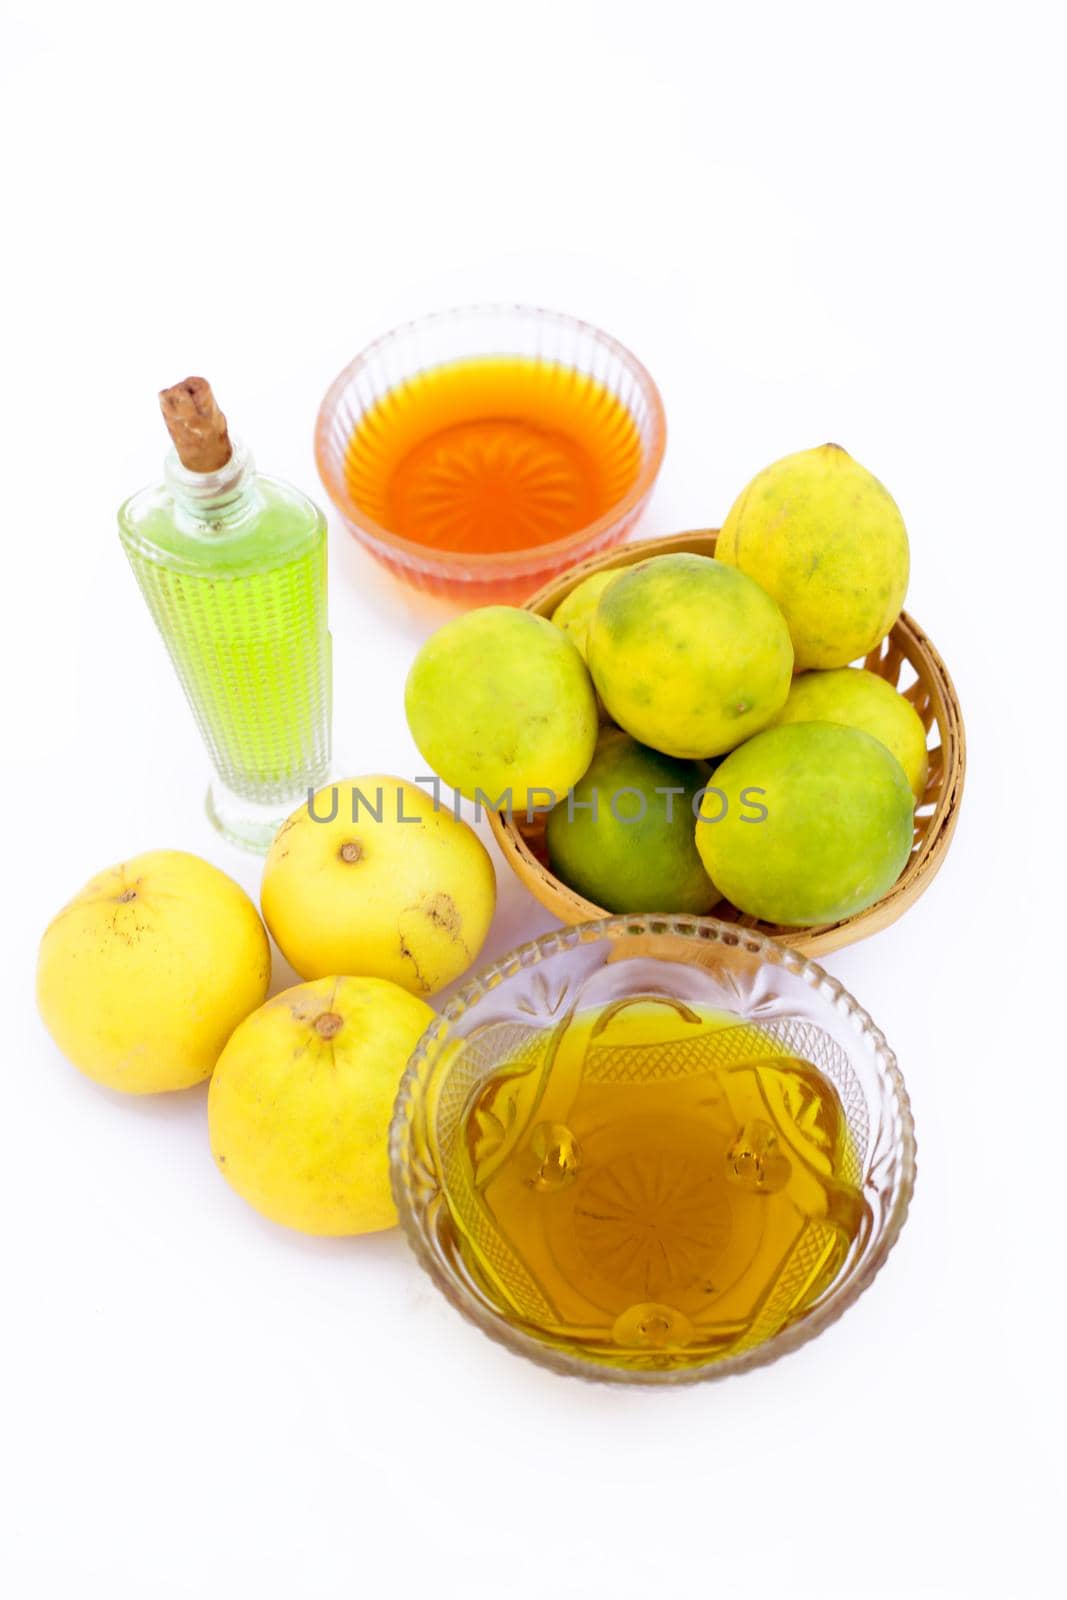 Lemon hair growth mask isolated on white i.e. Lemon juice well mixed with honey and Olive oil in a glass bowl with entire raw ingredients. by mirzamlk